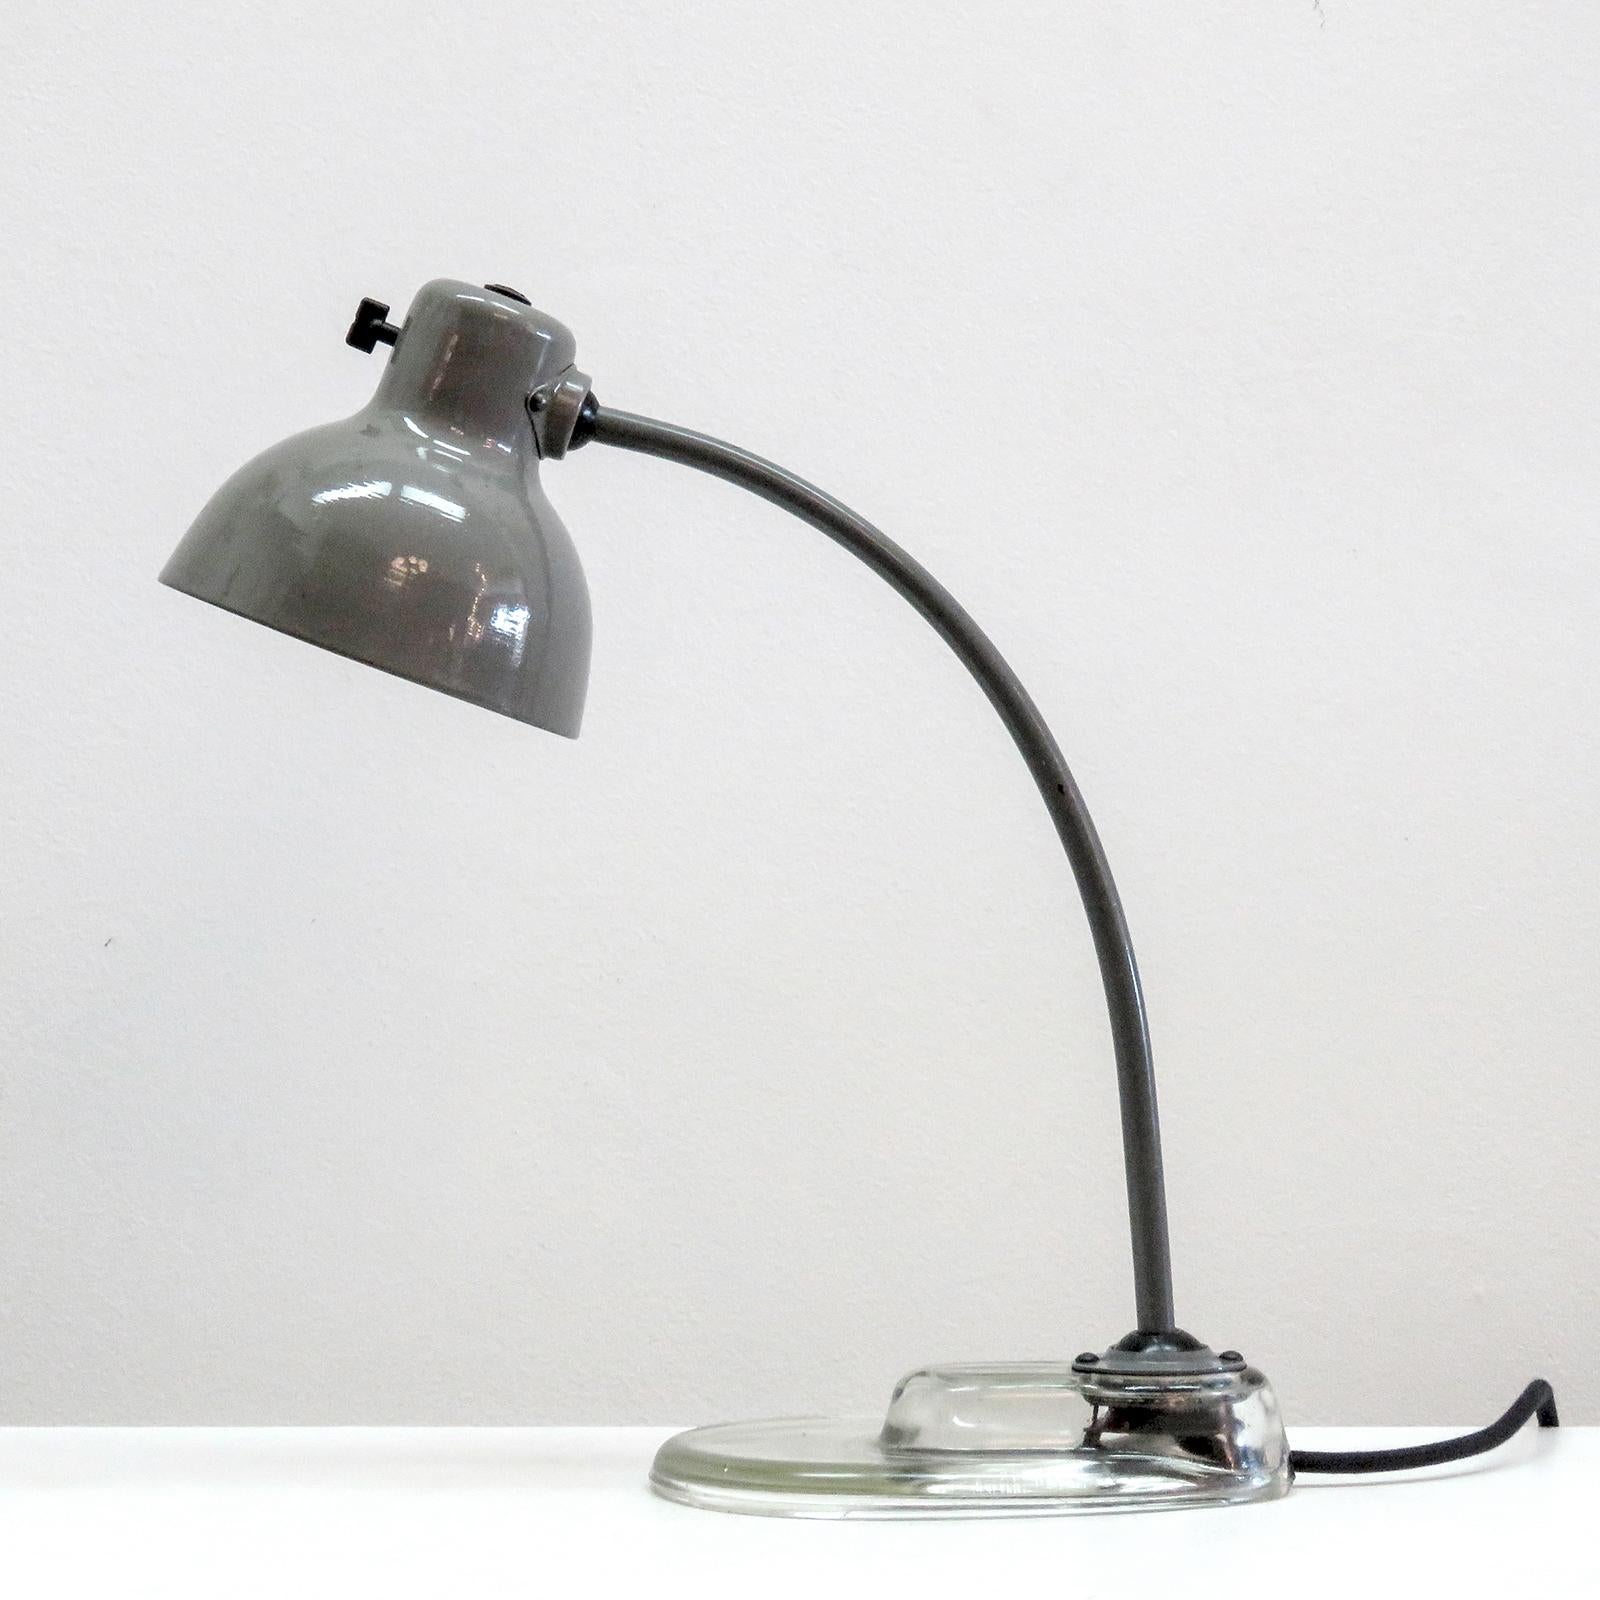 Stunning Kandem task lamps for Leuchtenbau Leipzig, post WWII Model manufactured with original Kandem No. 1115 parts, original light grey enameled metal shade and arm on a clear glass base, with individual on/off switch on the shade that was